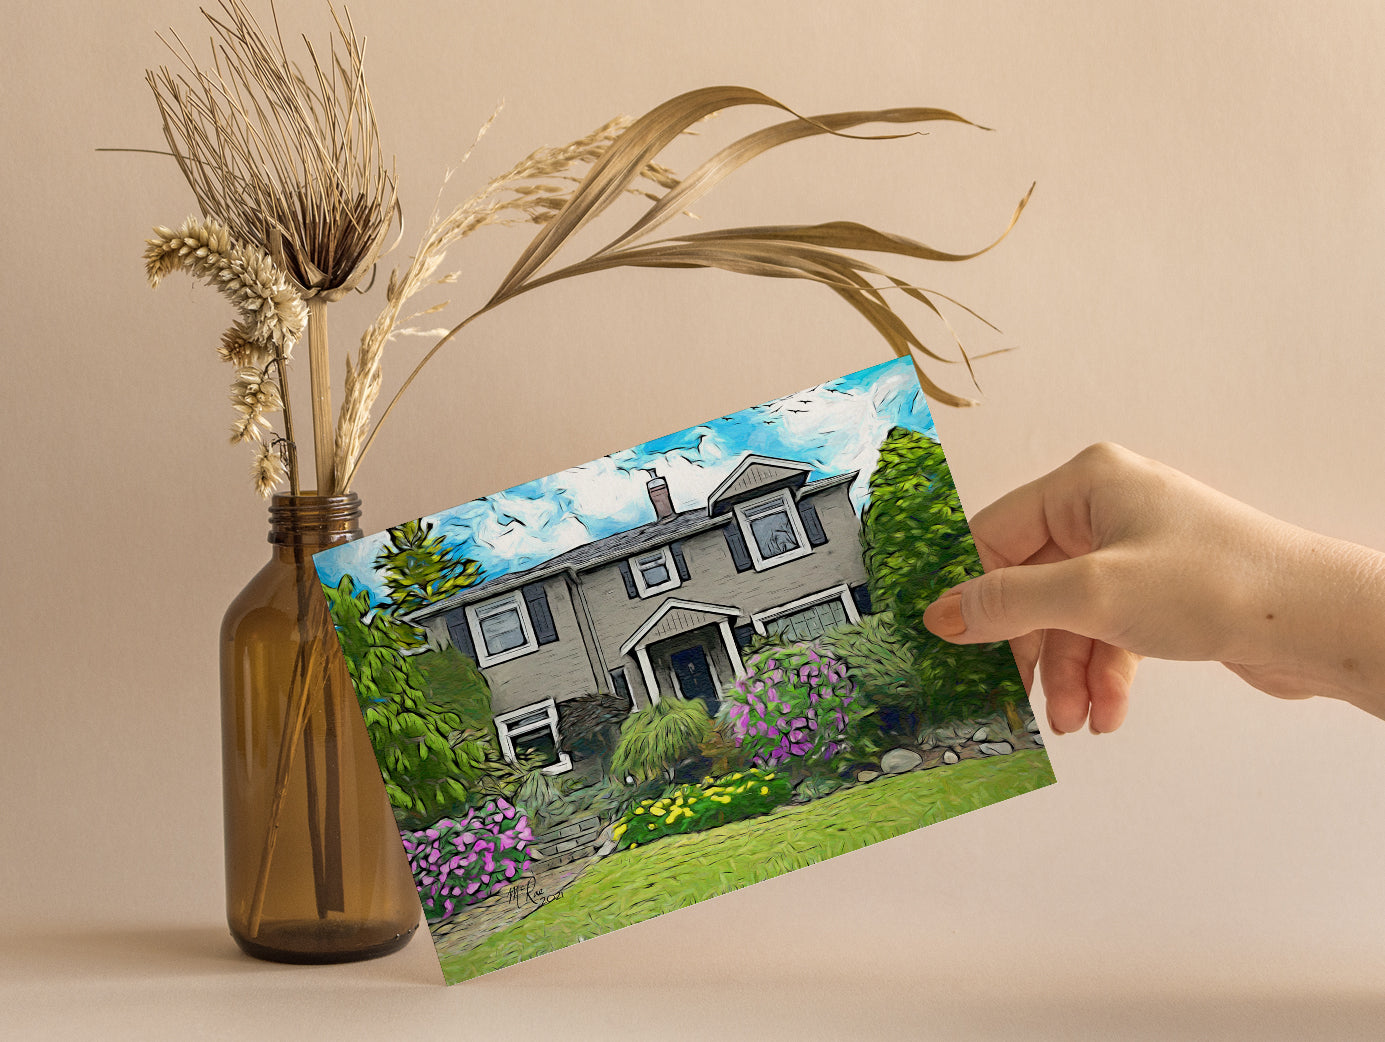 Realtors, growing your business through the thank you cards.